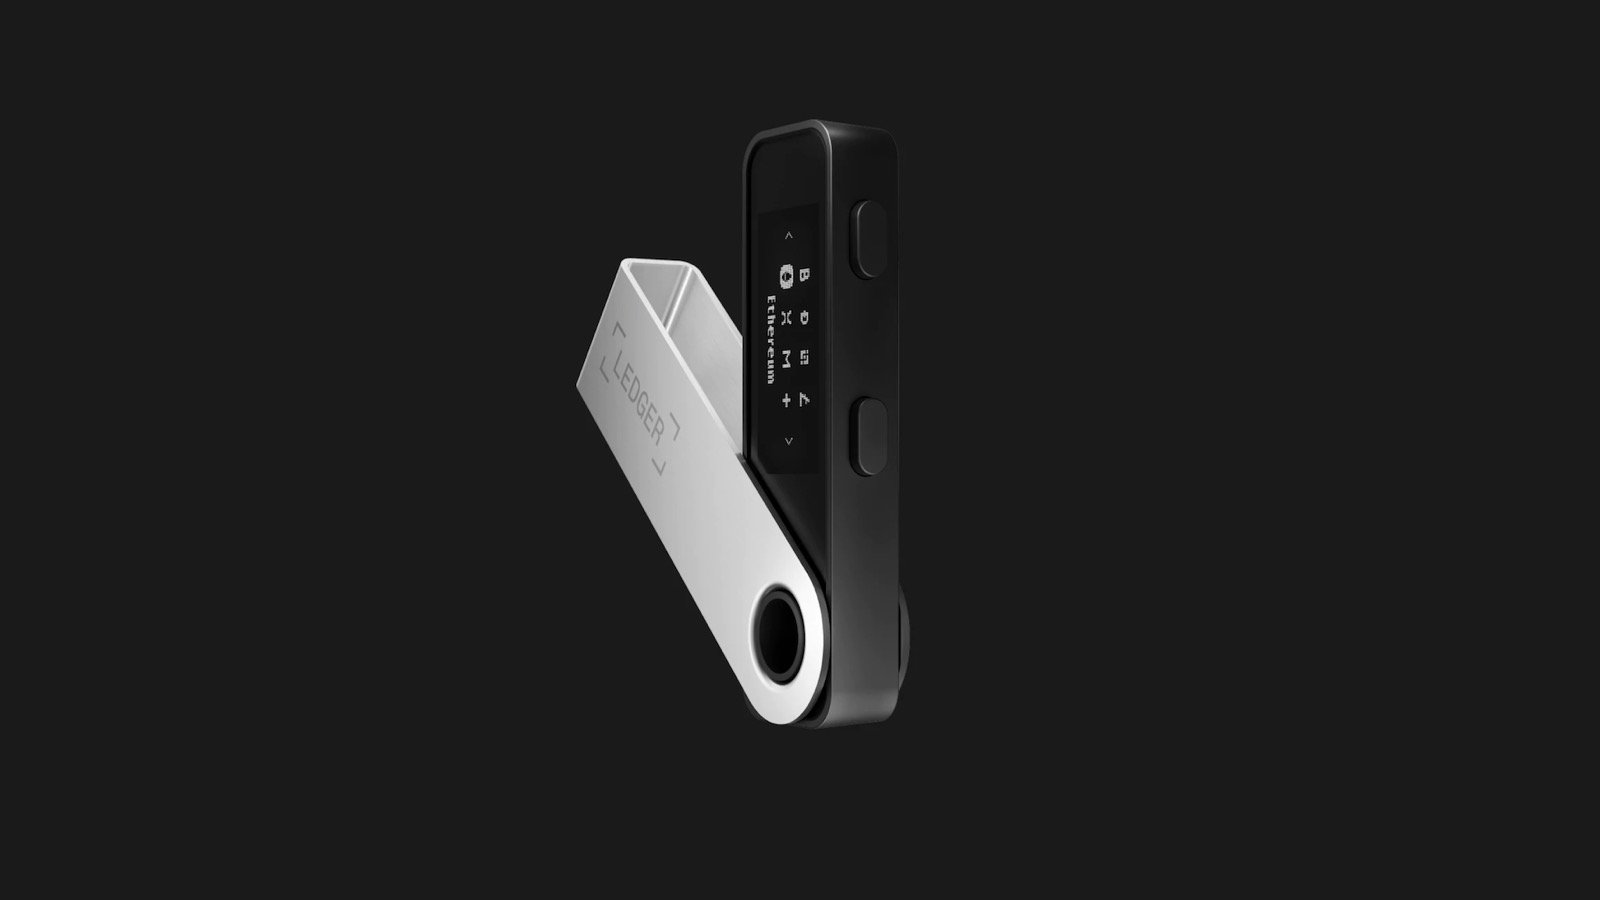 Ledger Nano S Plus cryptocurrency wallet features a bigger screen and more memory